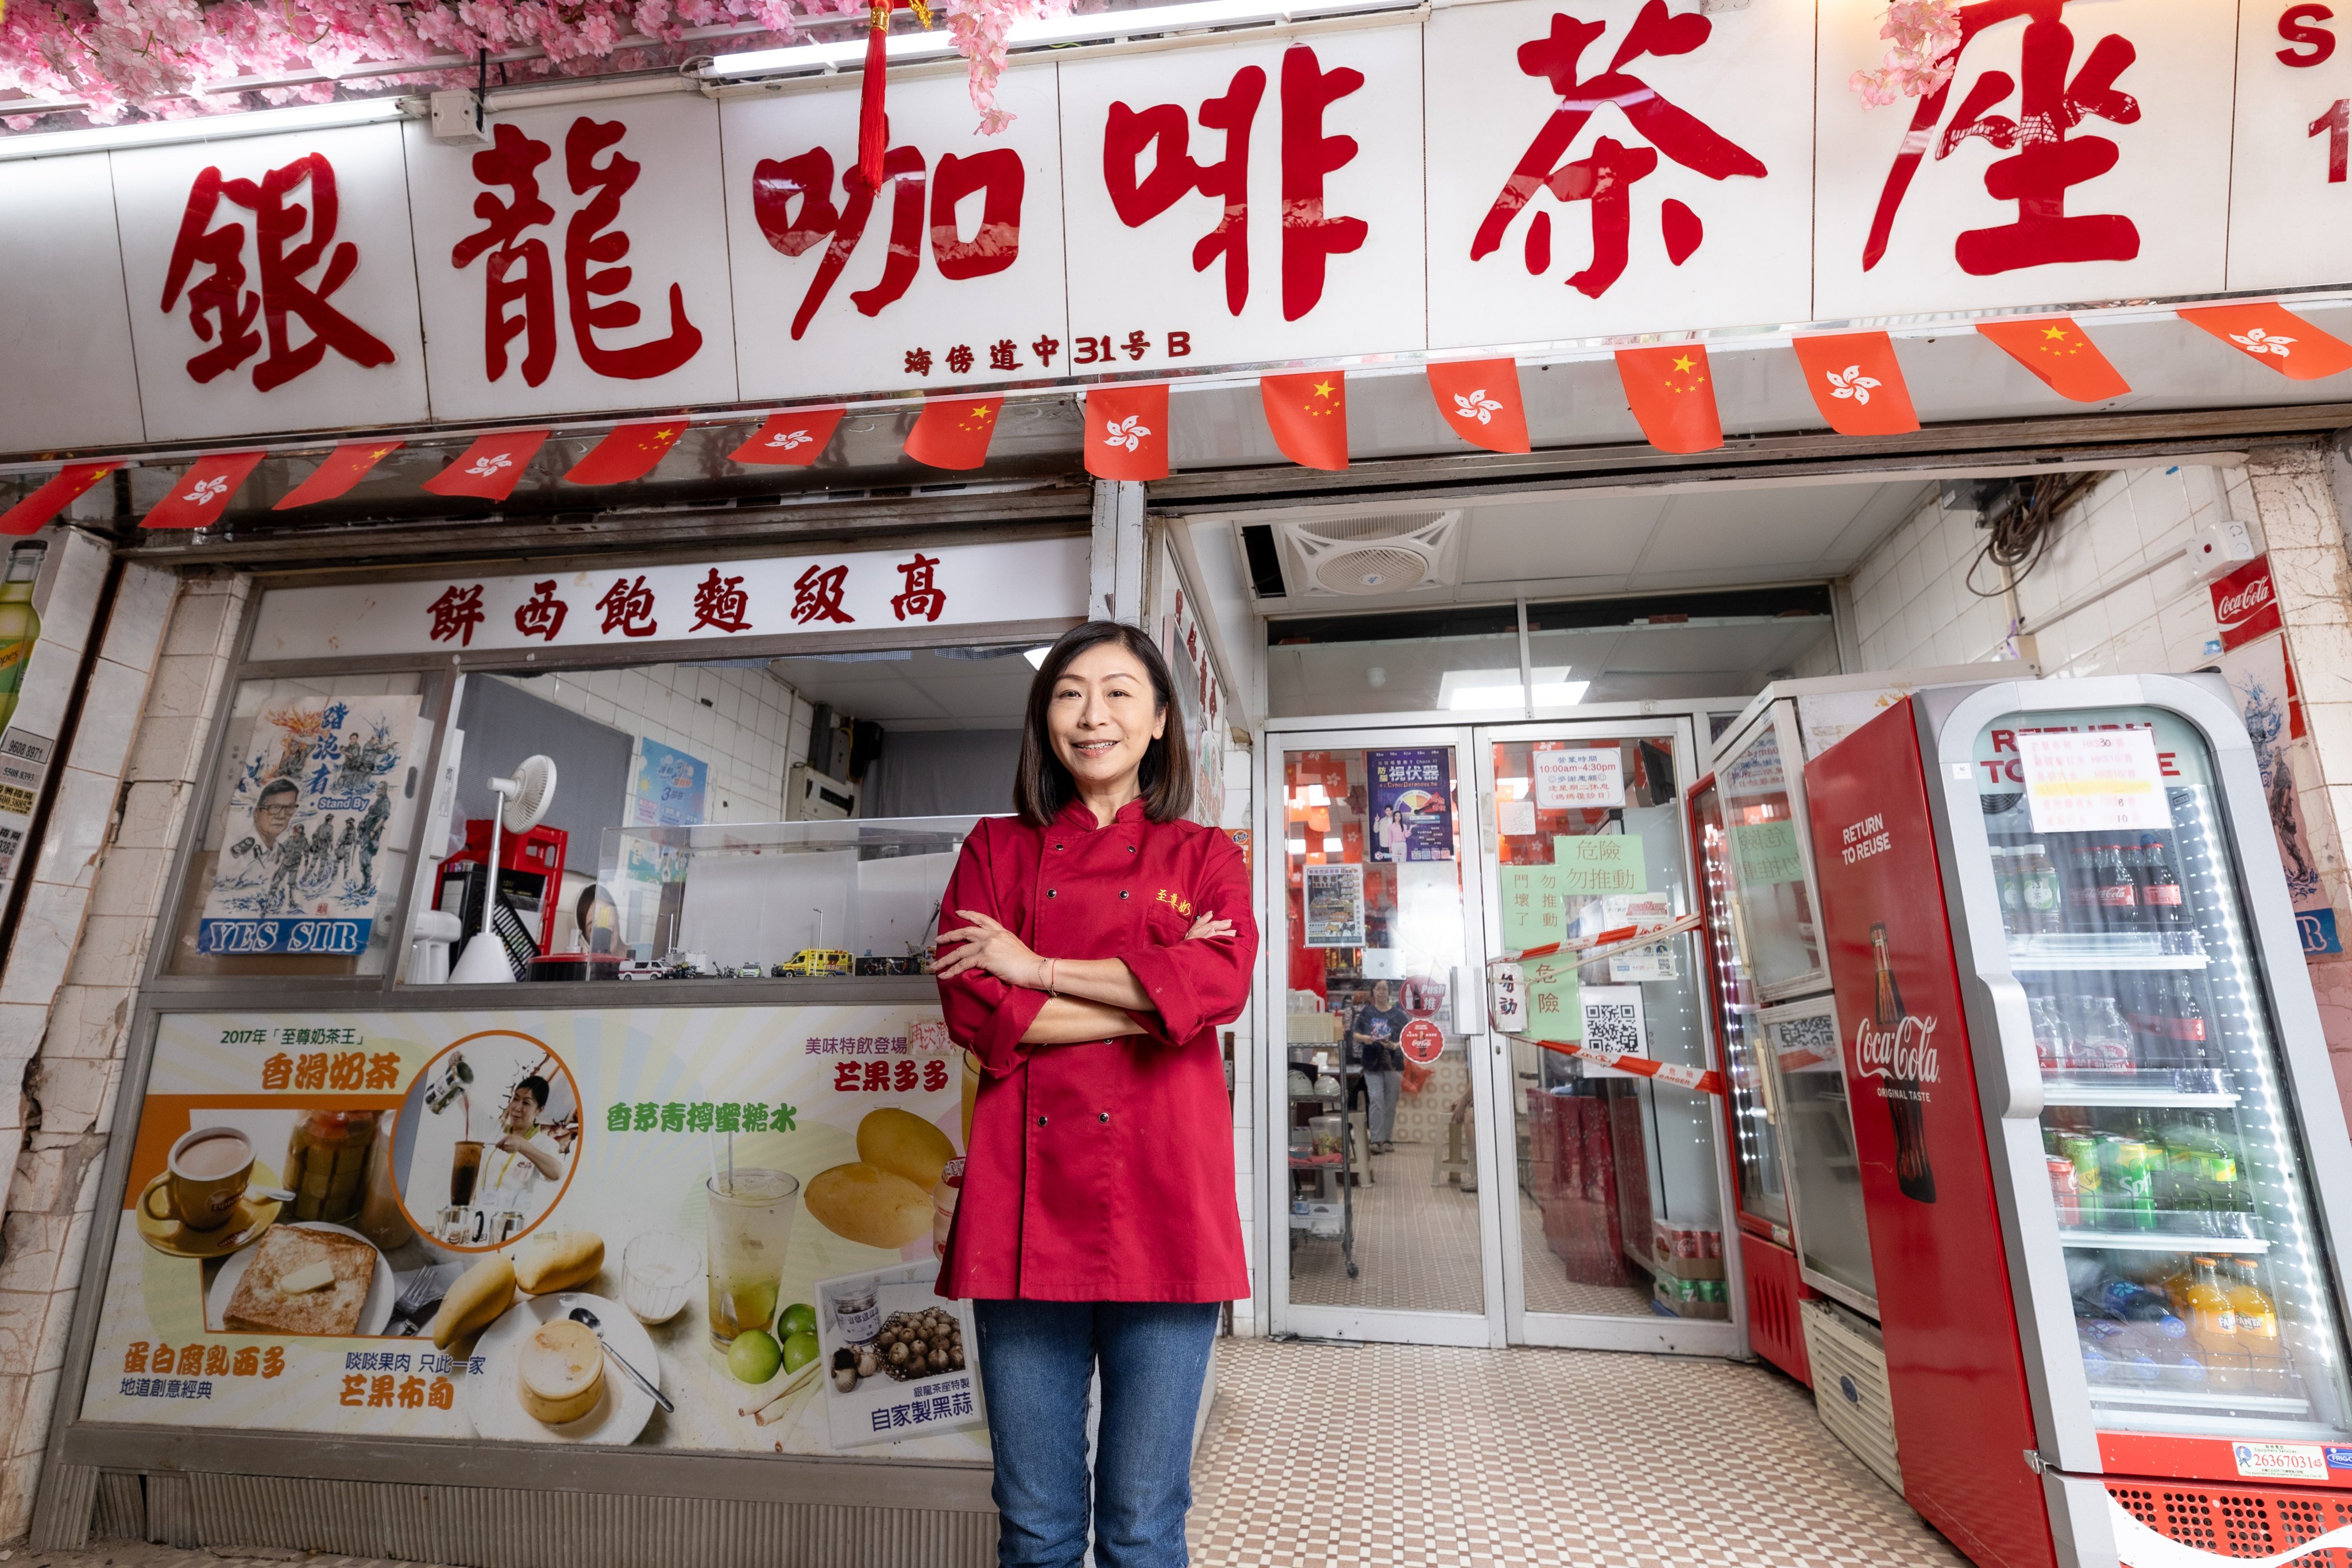 Lee Hoi-wu took over her family’s decades-old restaurant business in Hong Kong in 2014. Photo: Kong Yat-pang